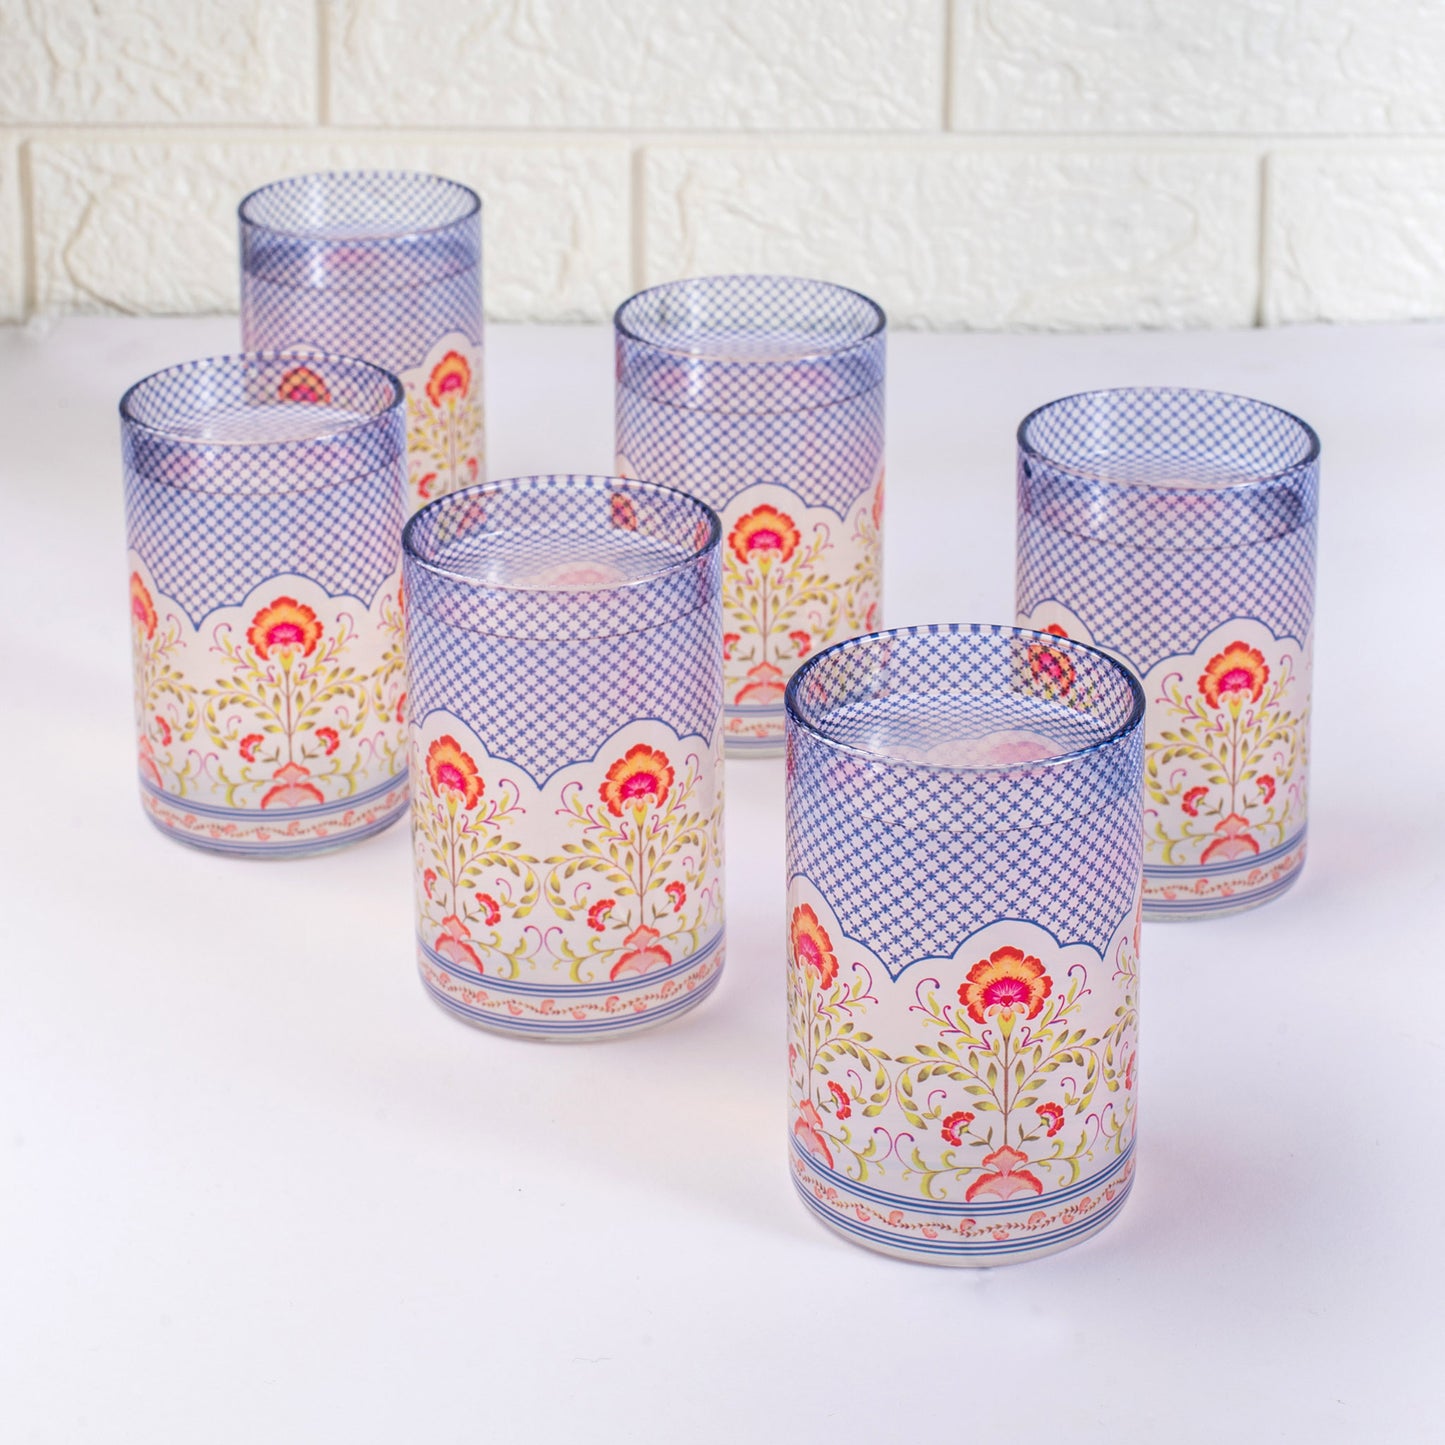 Floral Jali Print Glass Tumblers - Set of 4 and 6